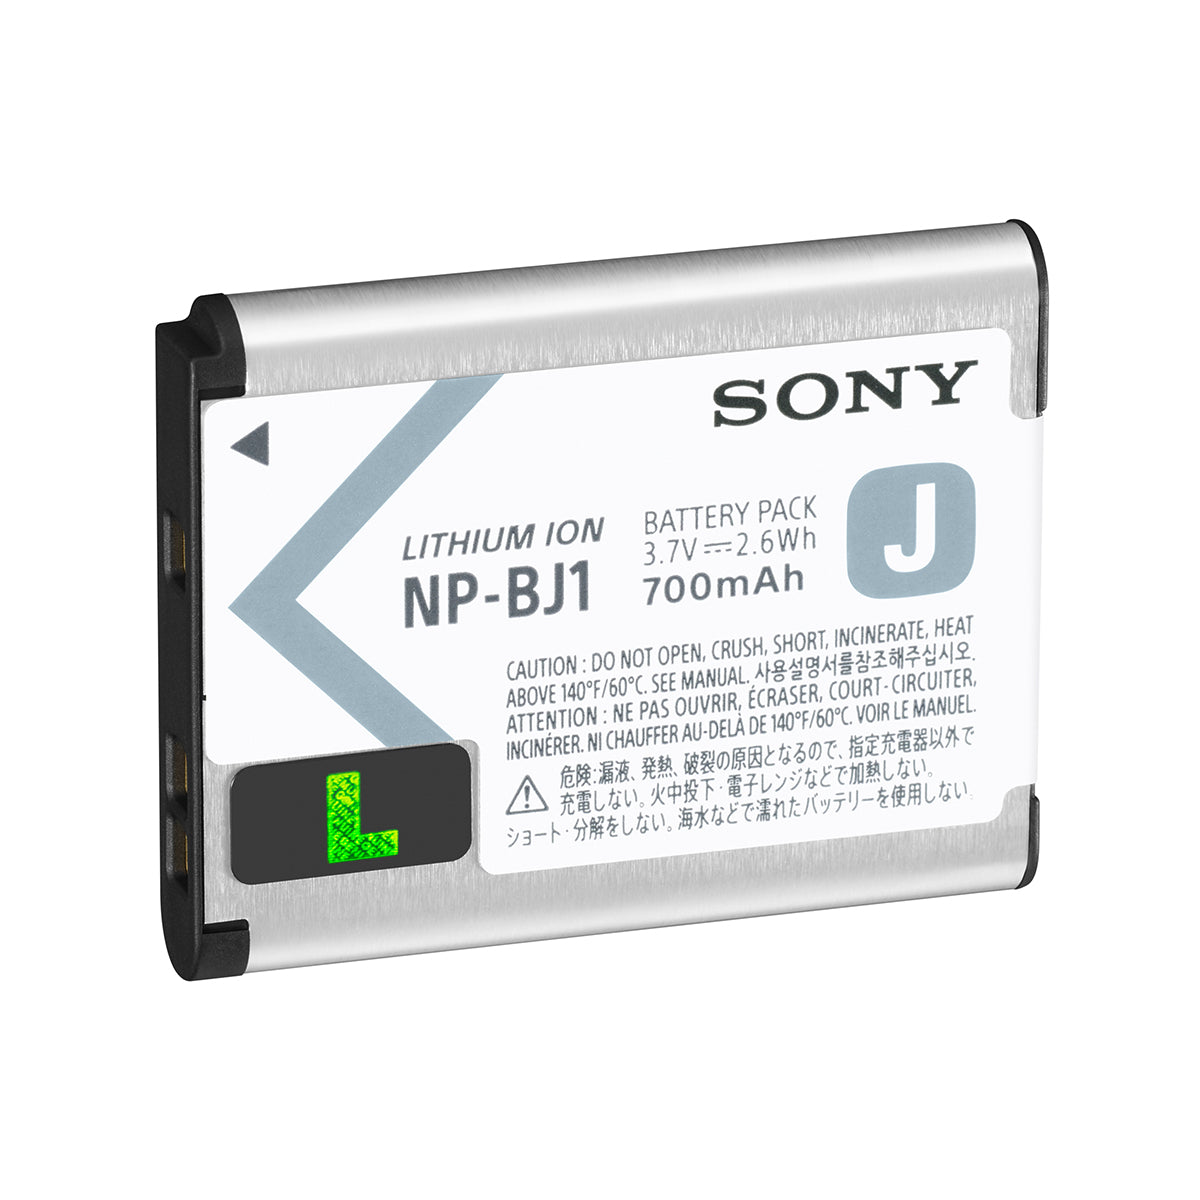 Sony NP-BJ1 Lithium-Ion Rechargeable Battery (700mAh) J Type